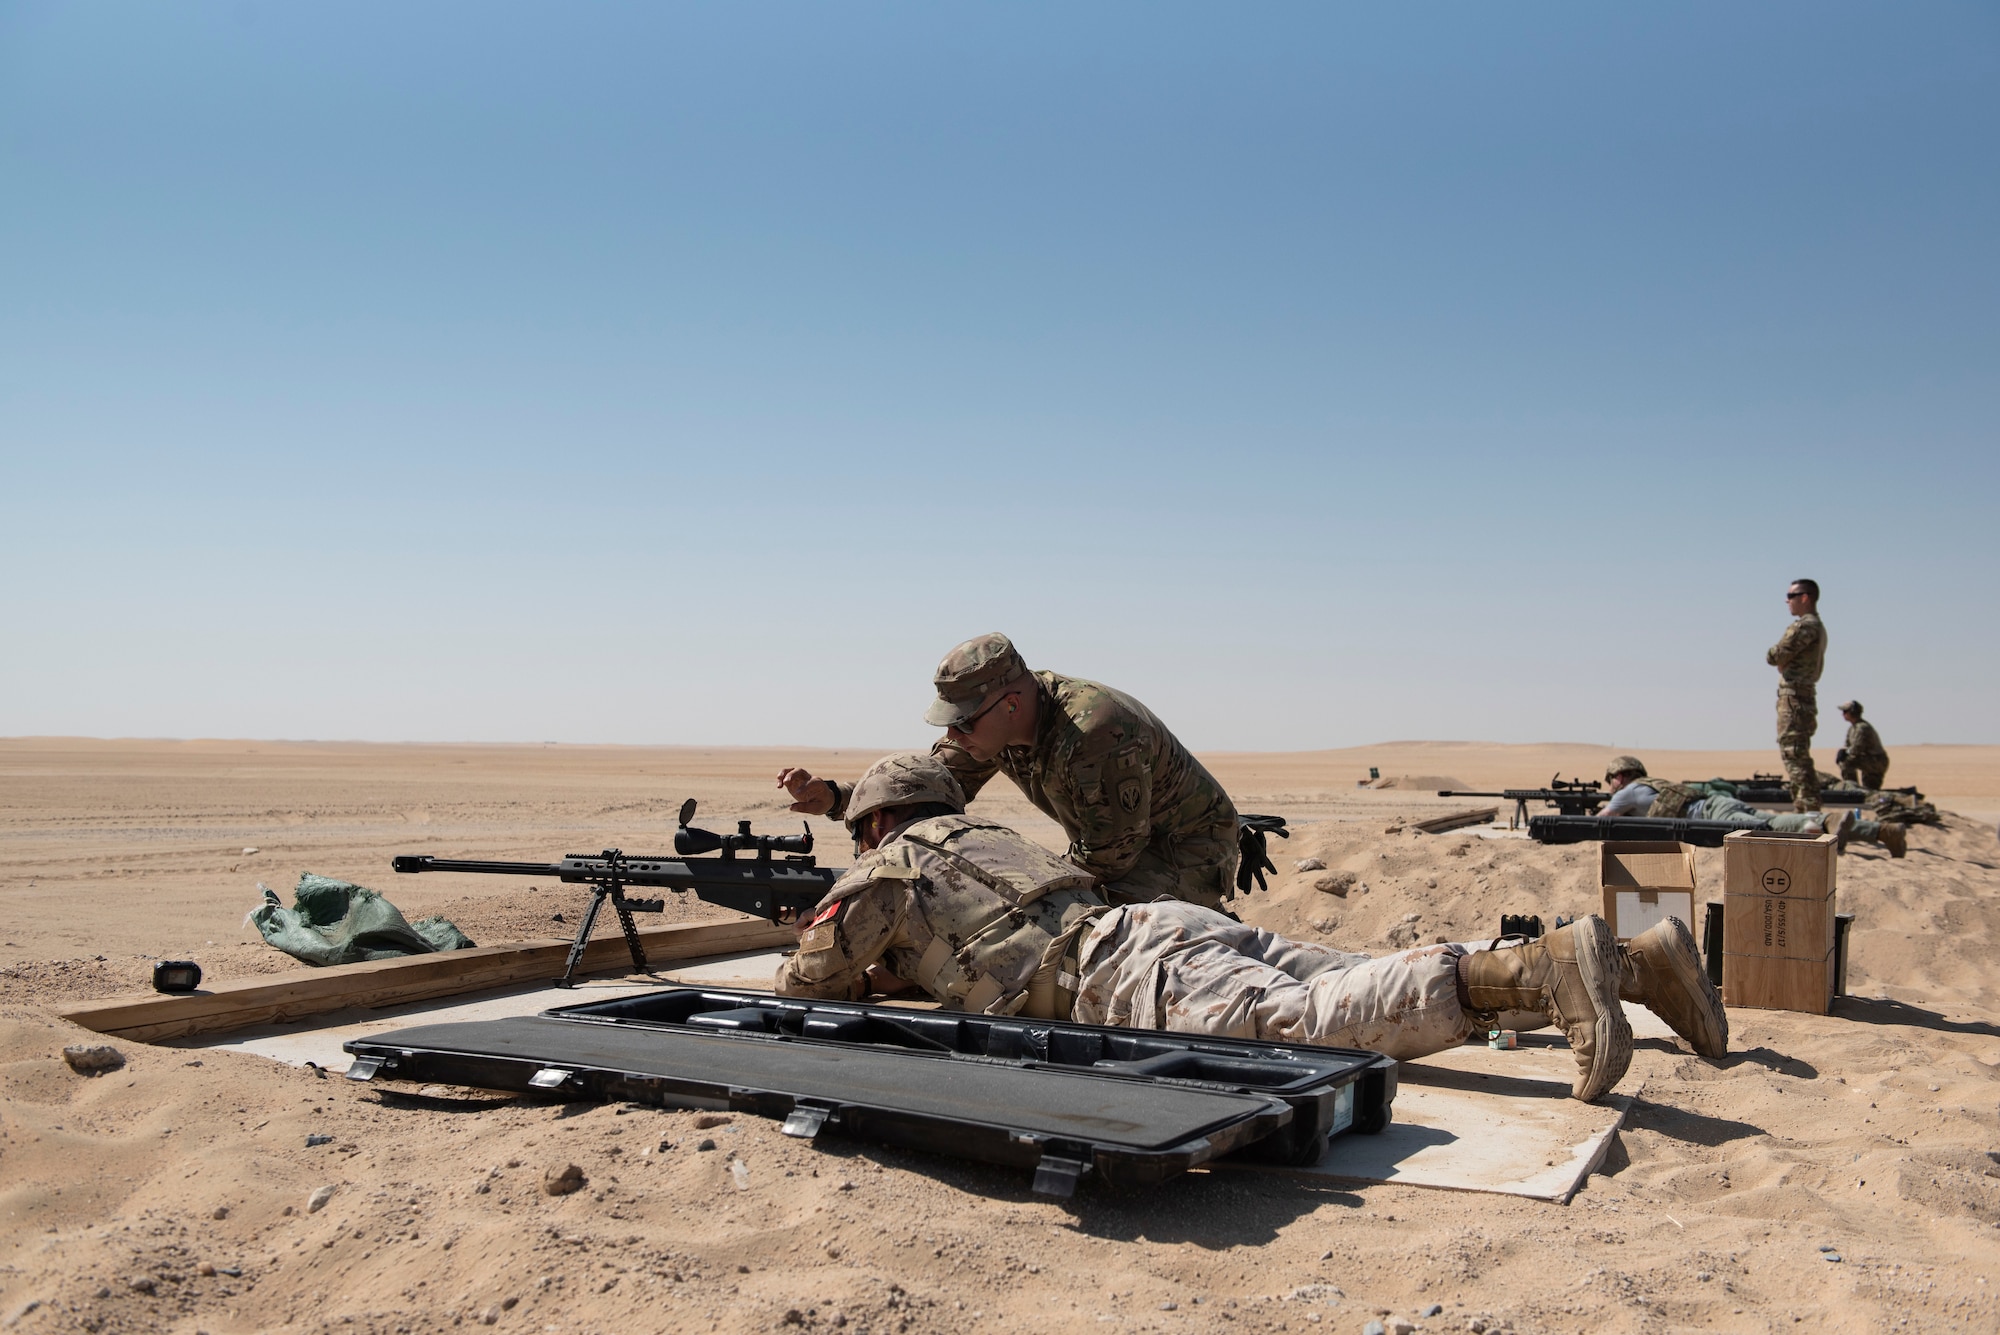 A Canadian Armed Forces member fires a Barrett .50-caliber rifle at the Udairi Range Complex, Kuwait, Oct. 12, 2020.